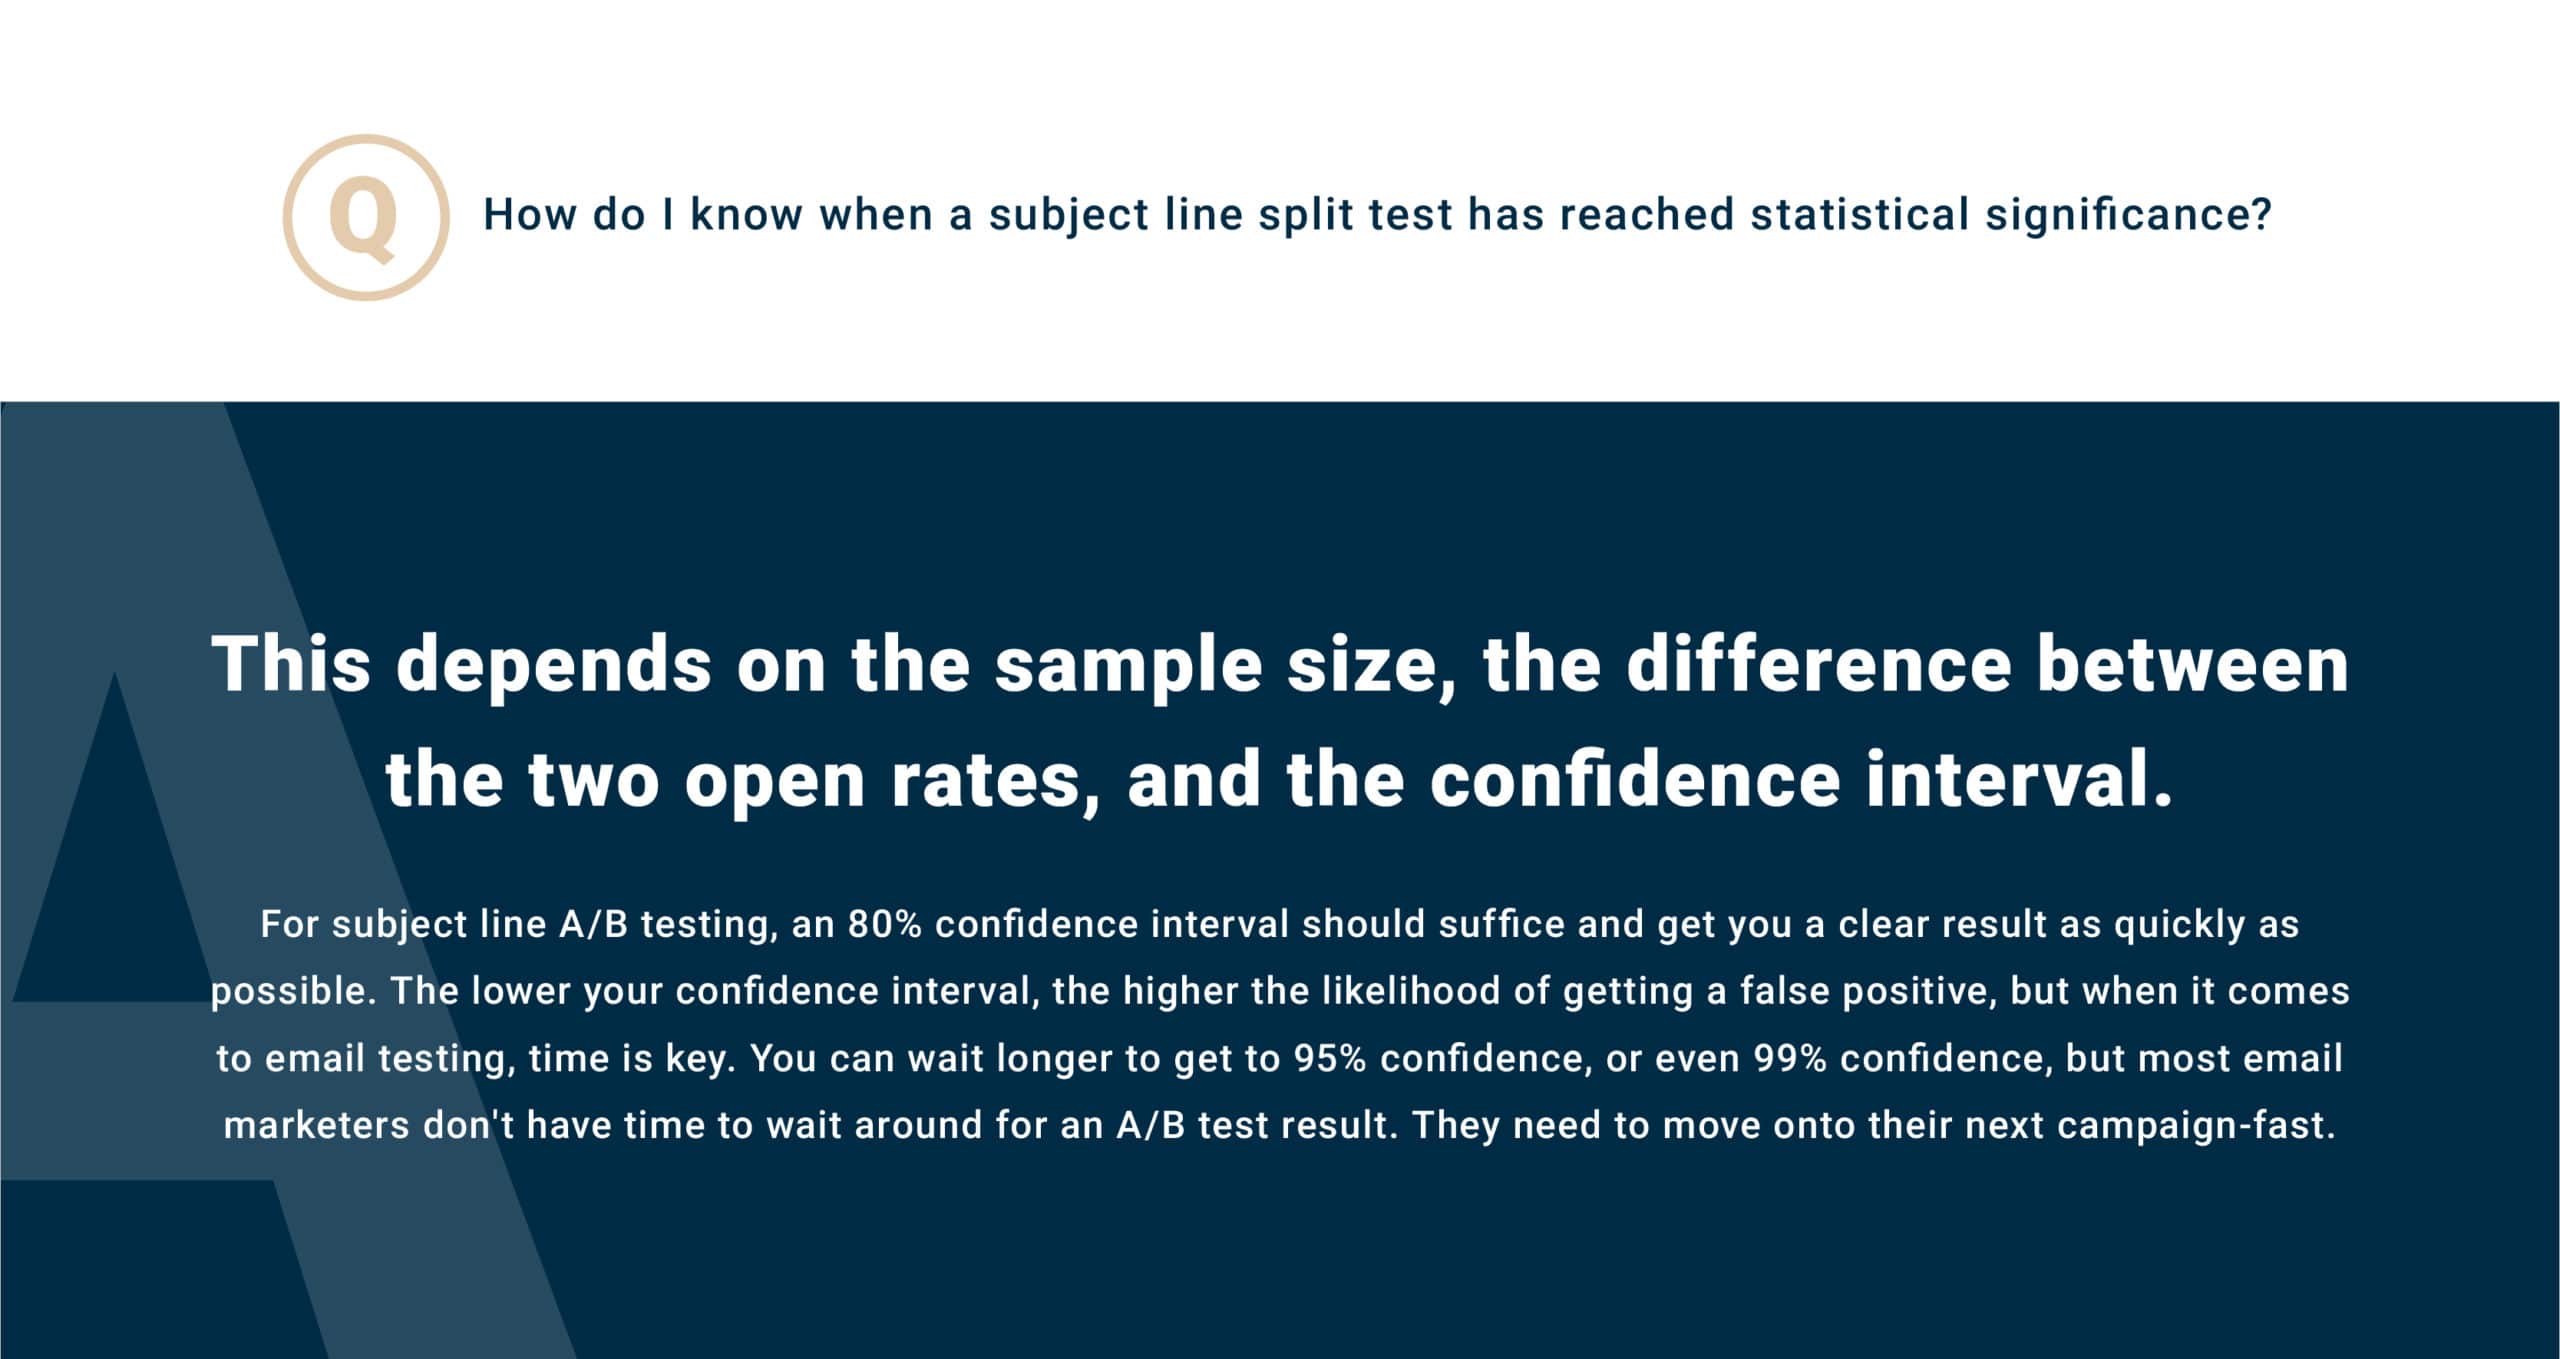 Q: How do I know when a subject line split test has reached statistical significance? This depends on the sample size, the difference between the two open rates, and the confidence interval. For subject line AB testing, an 80% confidence interval should suffice and get you a clear results as quickly as possible. The lower your confidence interval, the higher the likelihood of getting a false positive, but when it comes to email testing, time is key. You can wait longer to get to 95% confidence, or even 99%, but most email marketers don't have time to wait around for an AB test result. They need to move onto their next campaign.